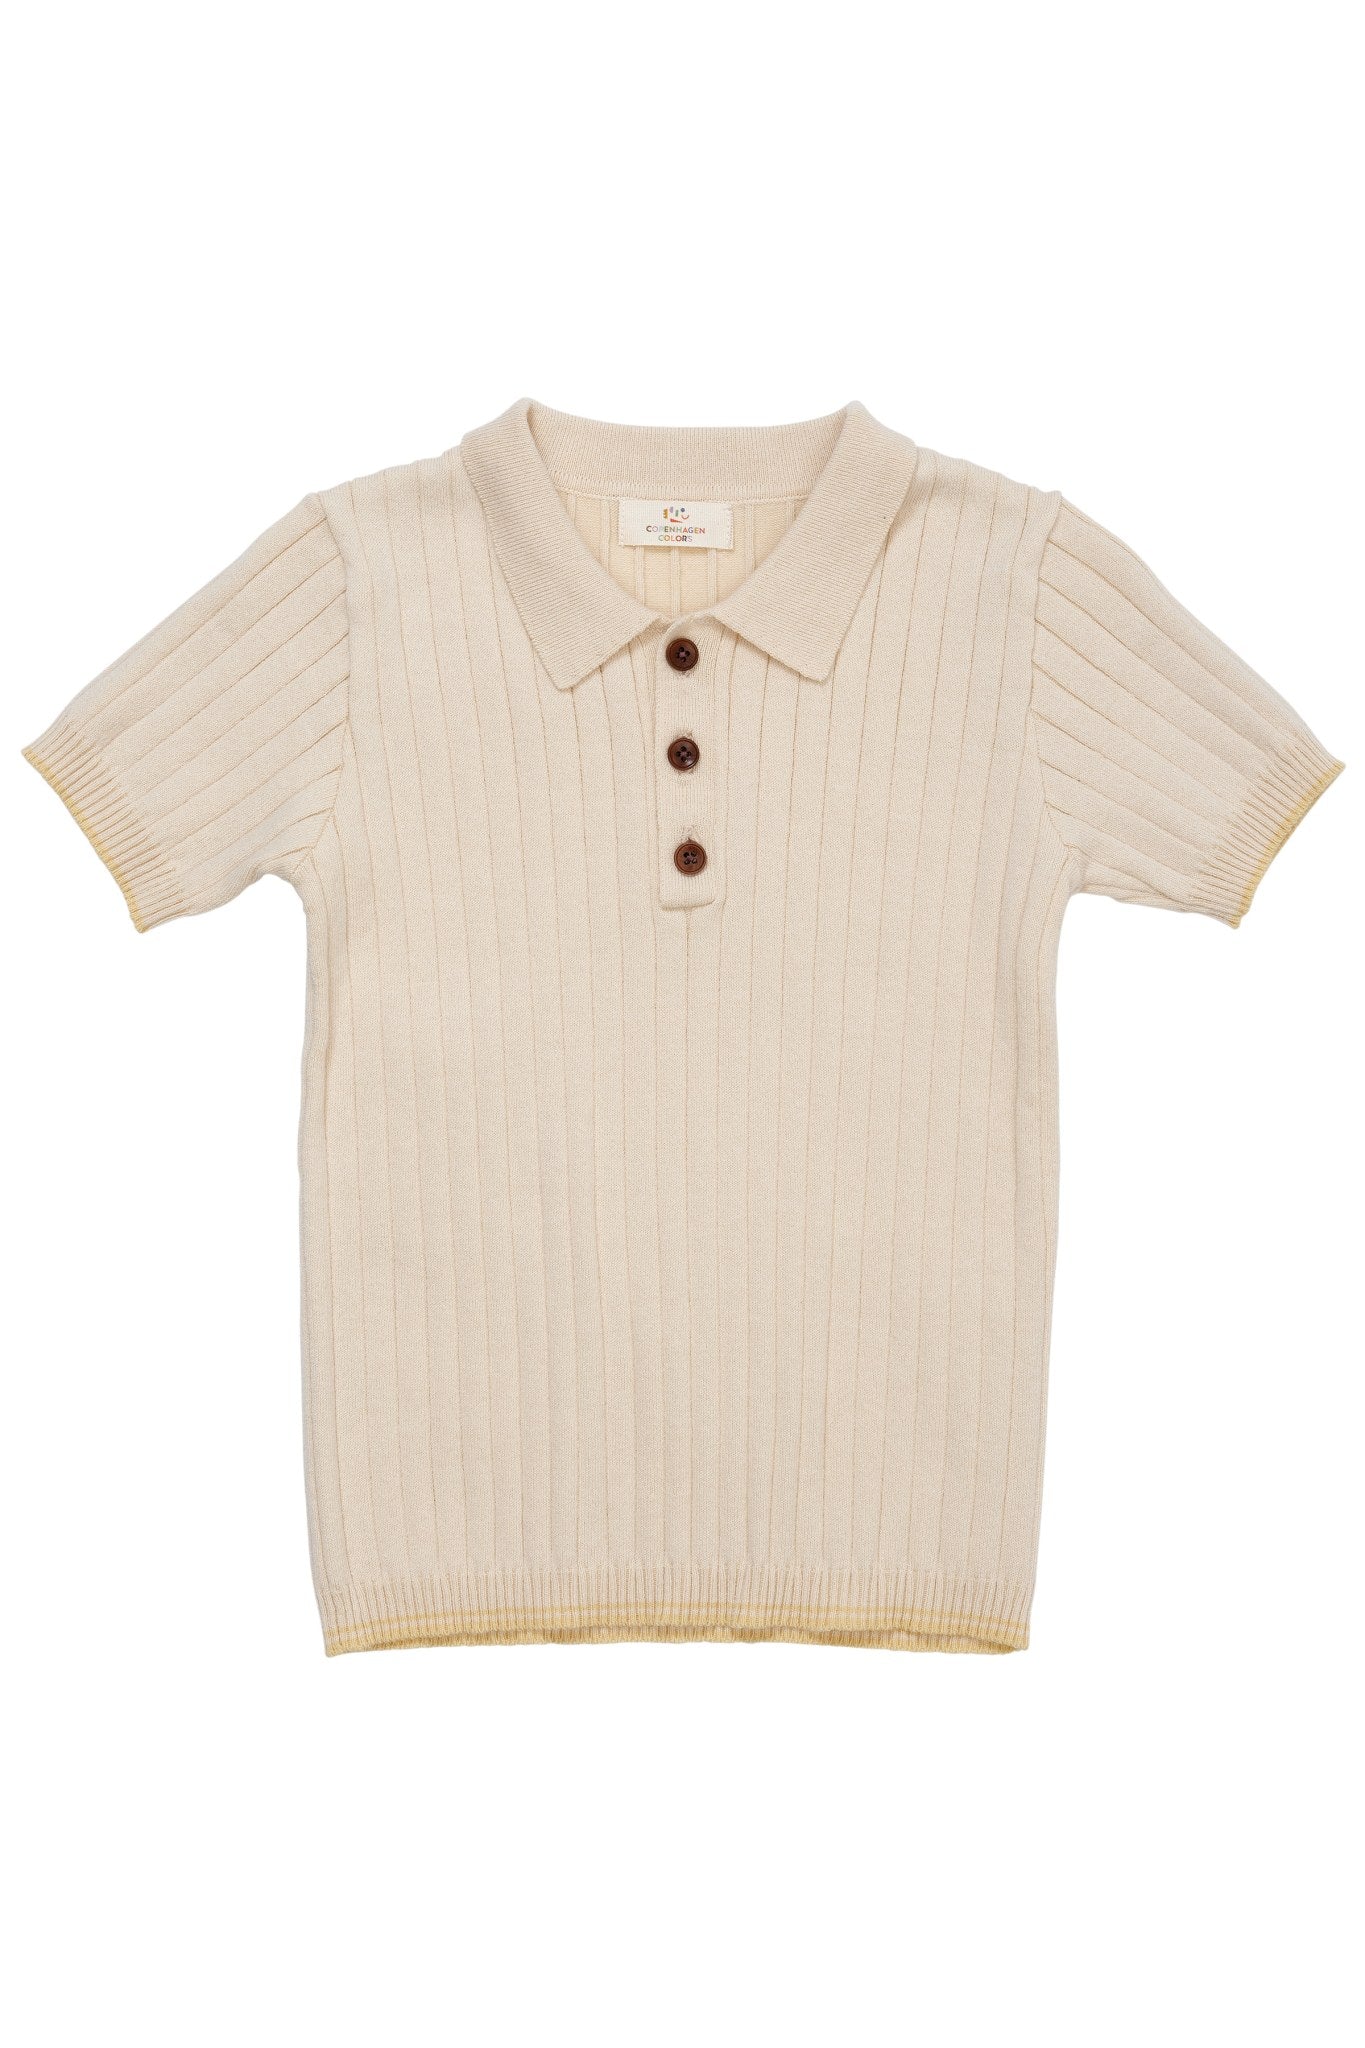 RIB KNITTED POLO - CREAM/PALE YELLOW COMB.